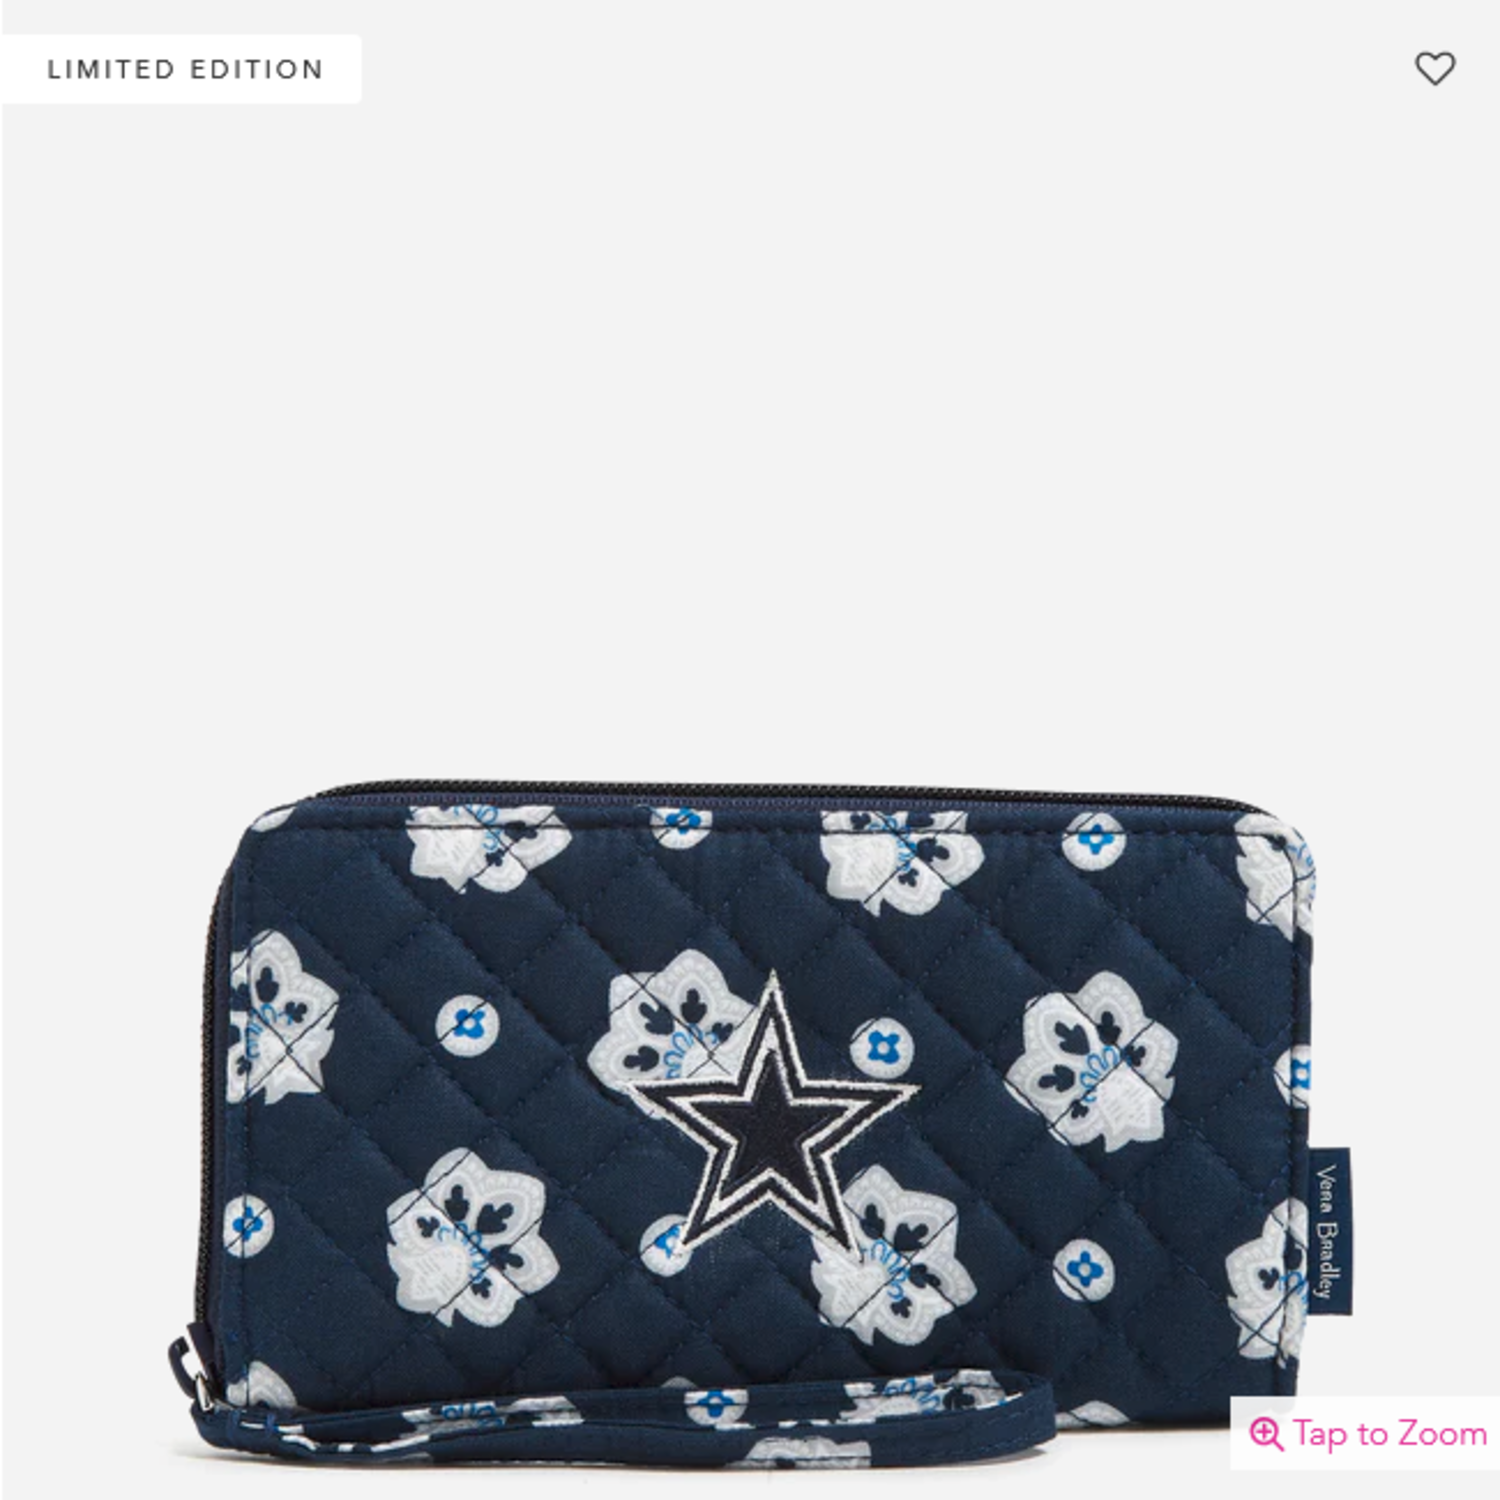 RFID Front Zip Wristlet:Blue/Gray Bandana w/ Dallas Cowboys - Heart and  Home Gifts and Accessories